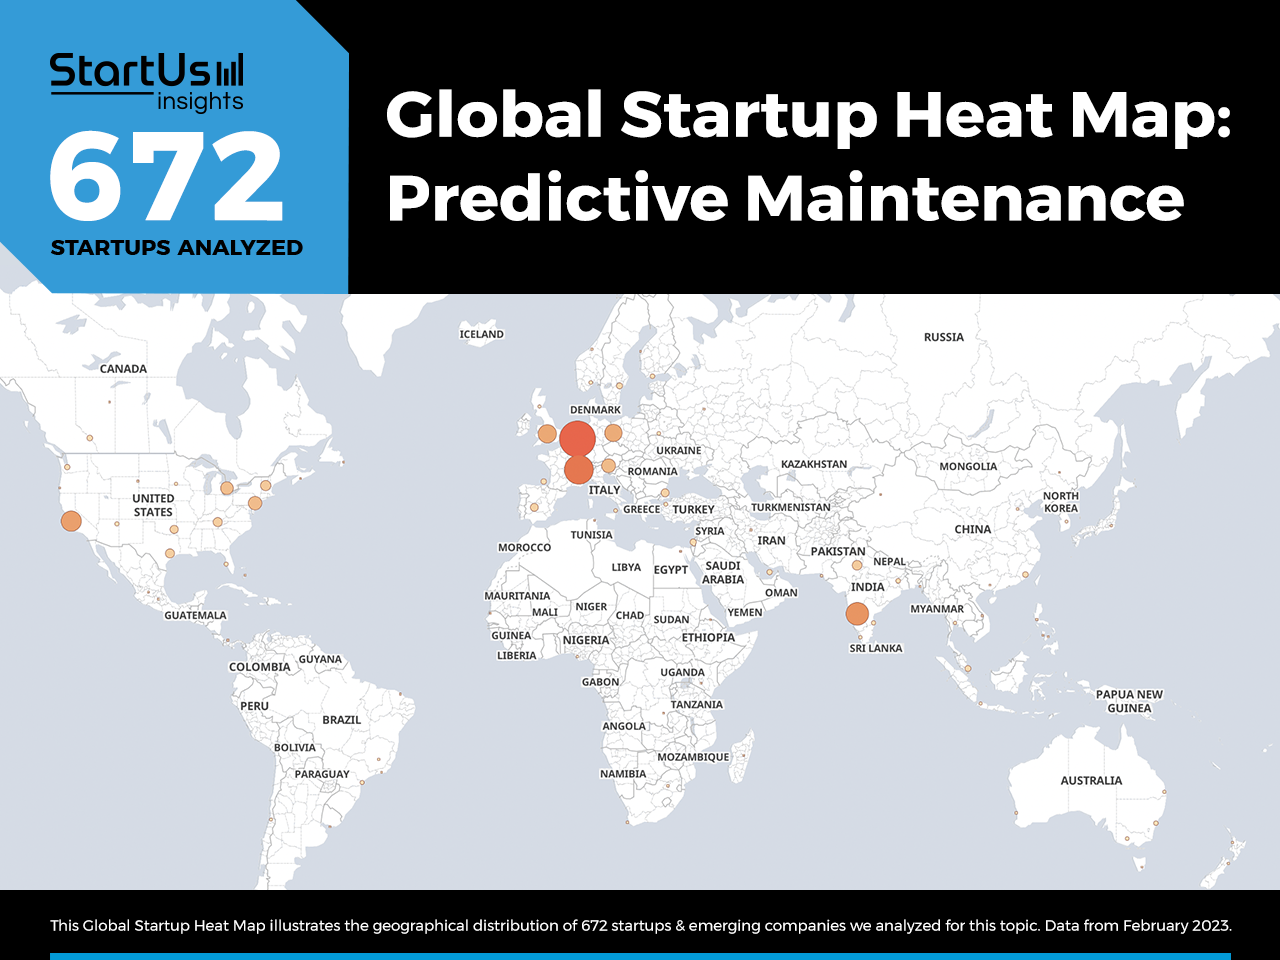 Predictive-Maintenance-examples-Heat-Map-StartUs-Insights-noresize